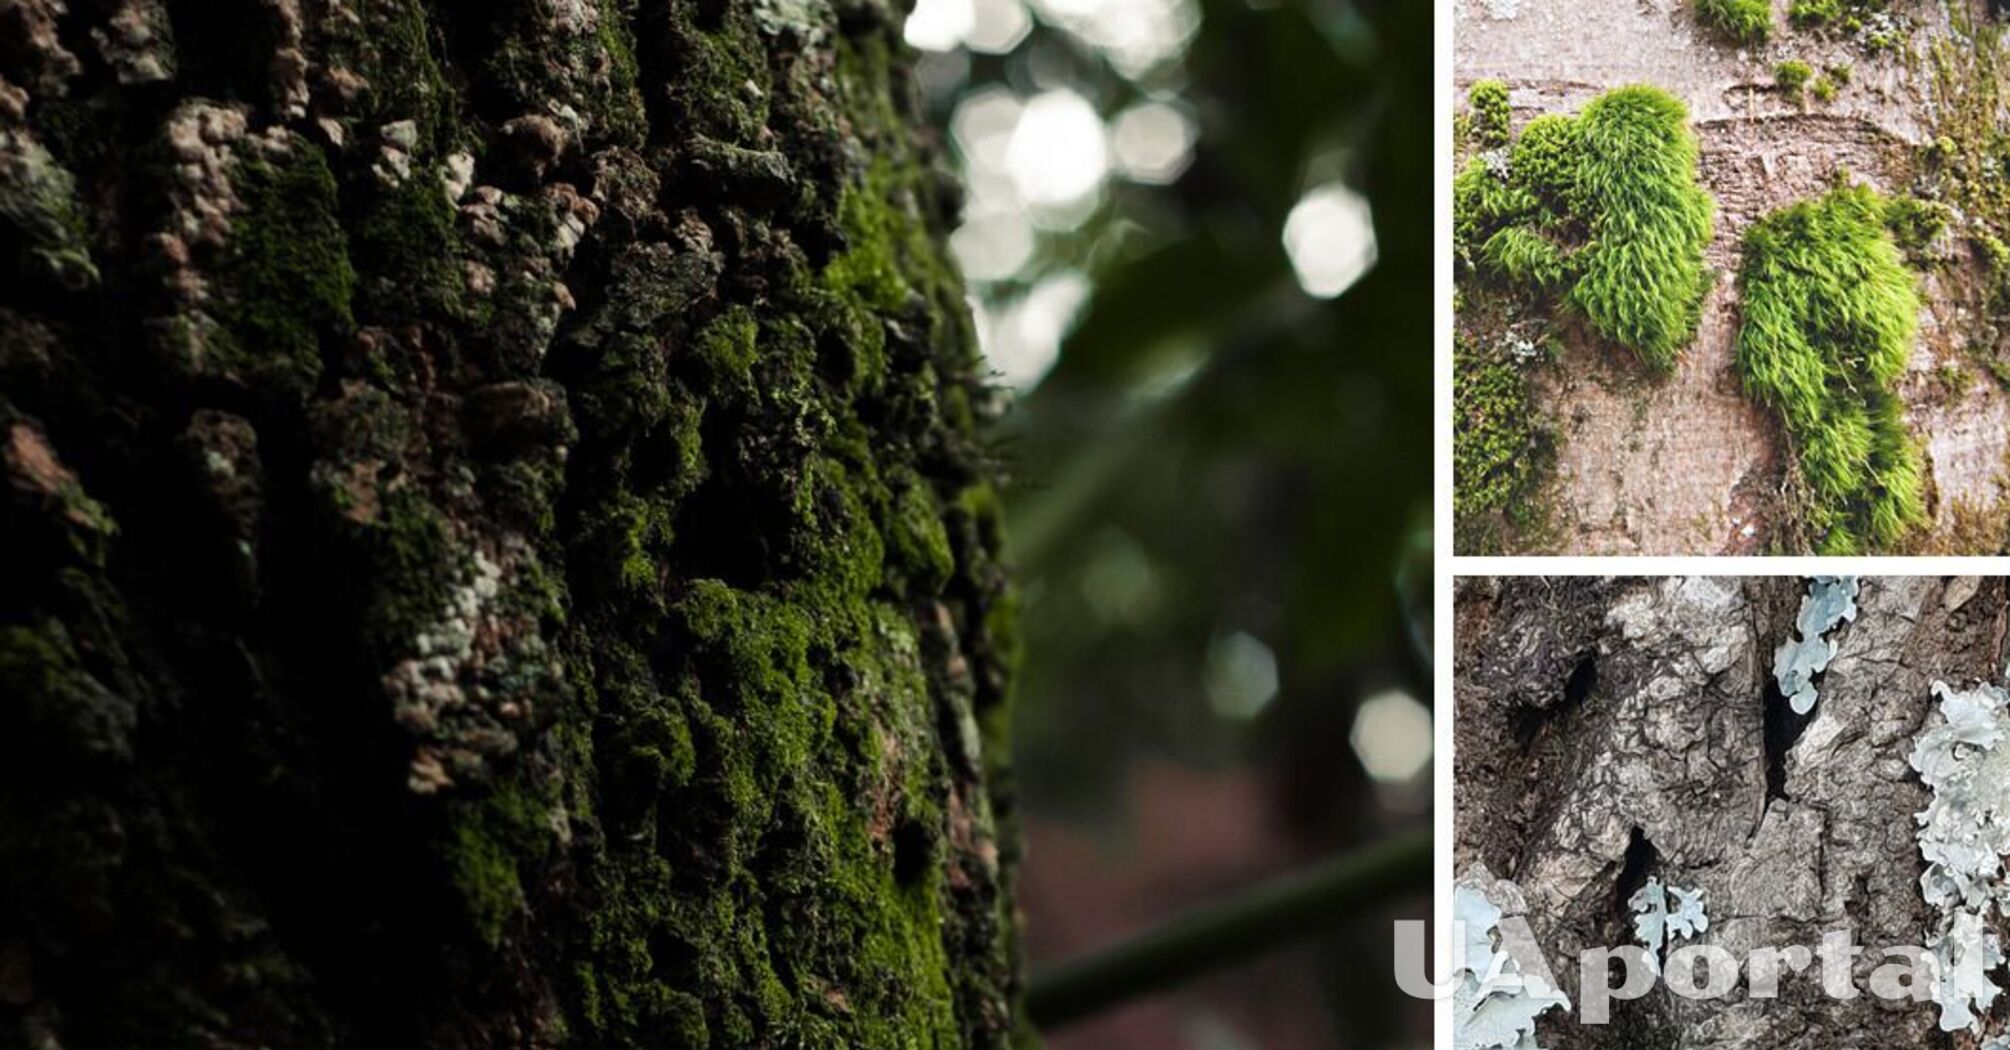 Three easy ways to get rid of moss and lichen on fruit trees